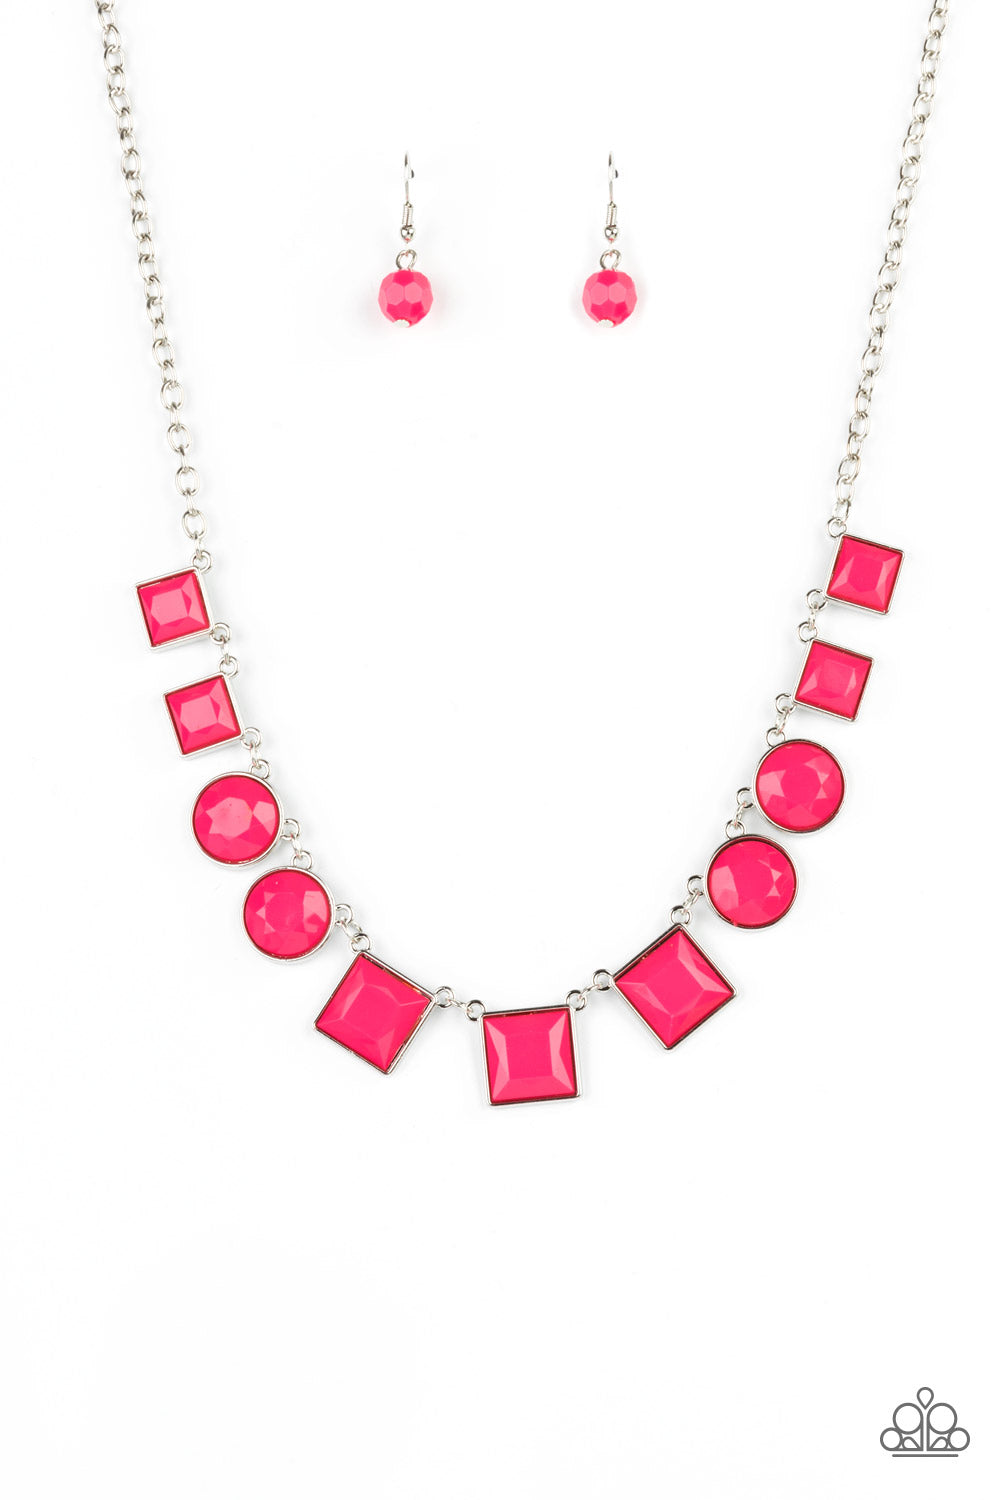 Tic Tac TREND Pink Necklace - Paparazzi Accessories  Bright geometric square and round beads in the Pantone® of Raspberry Sorbet are pressed into simple silver frames to create a lively statement below the collar. Features an adjustable clasp closure.  All Paparazzi Accessories are lead free and nickel free!  Sold as one individual necklace. Includes one pair of matching earrings.